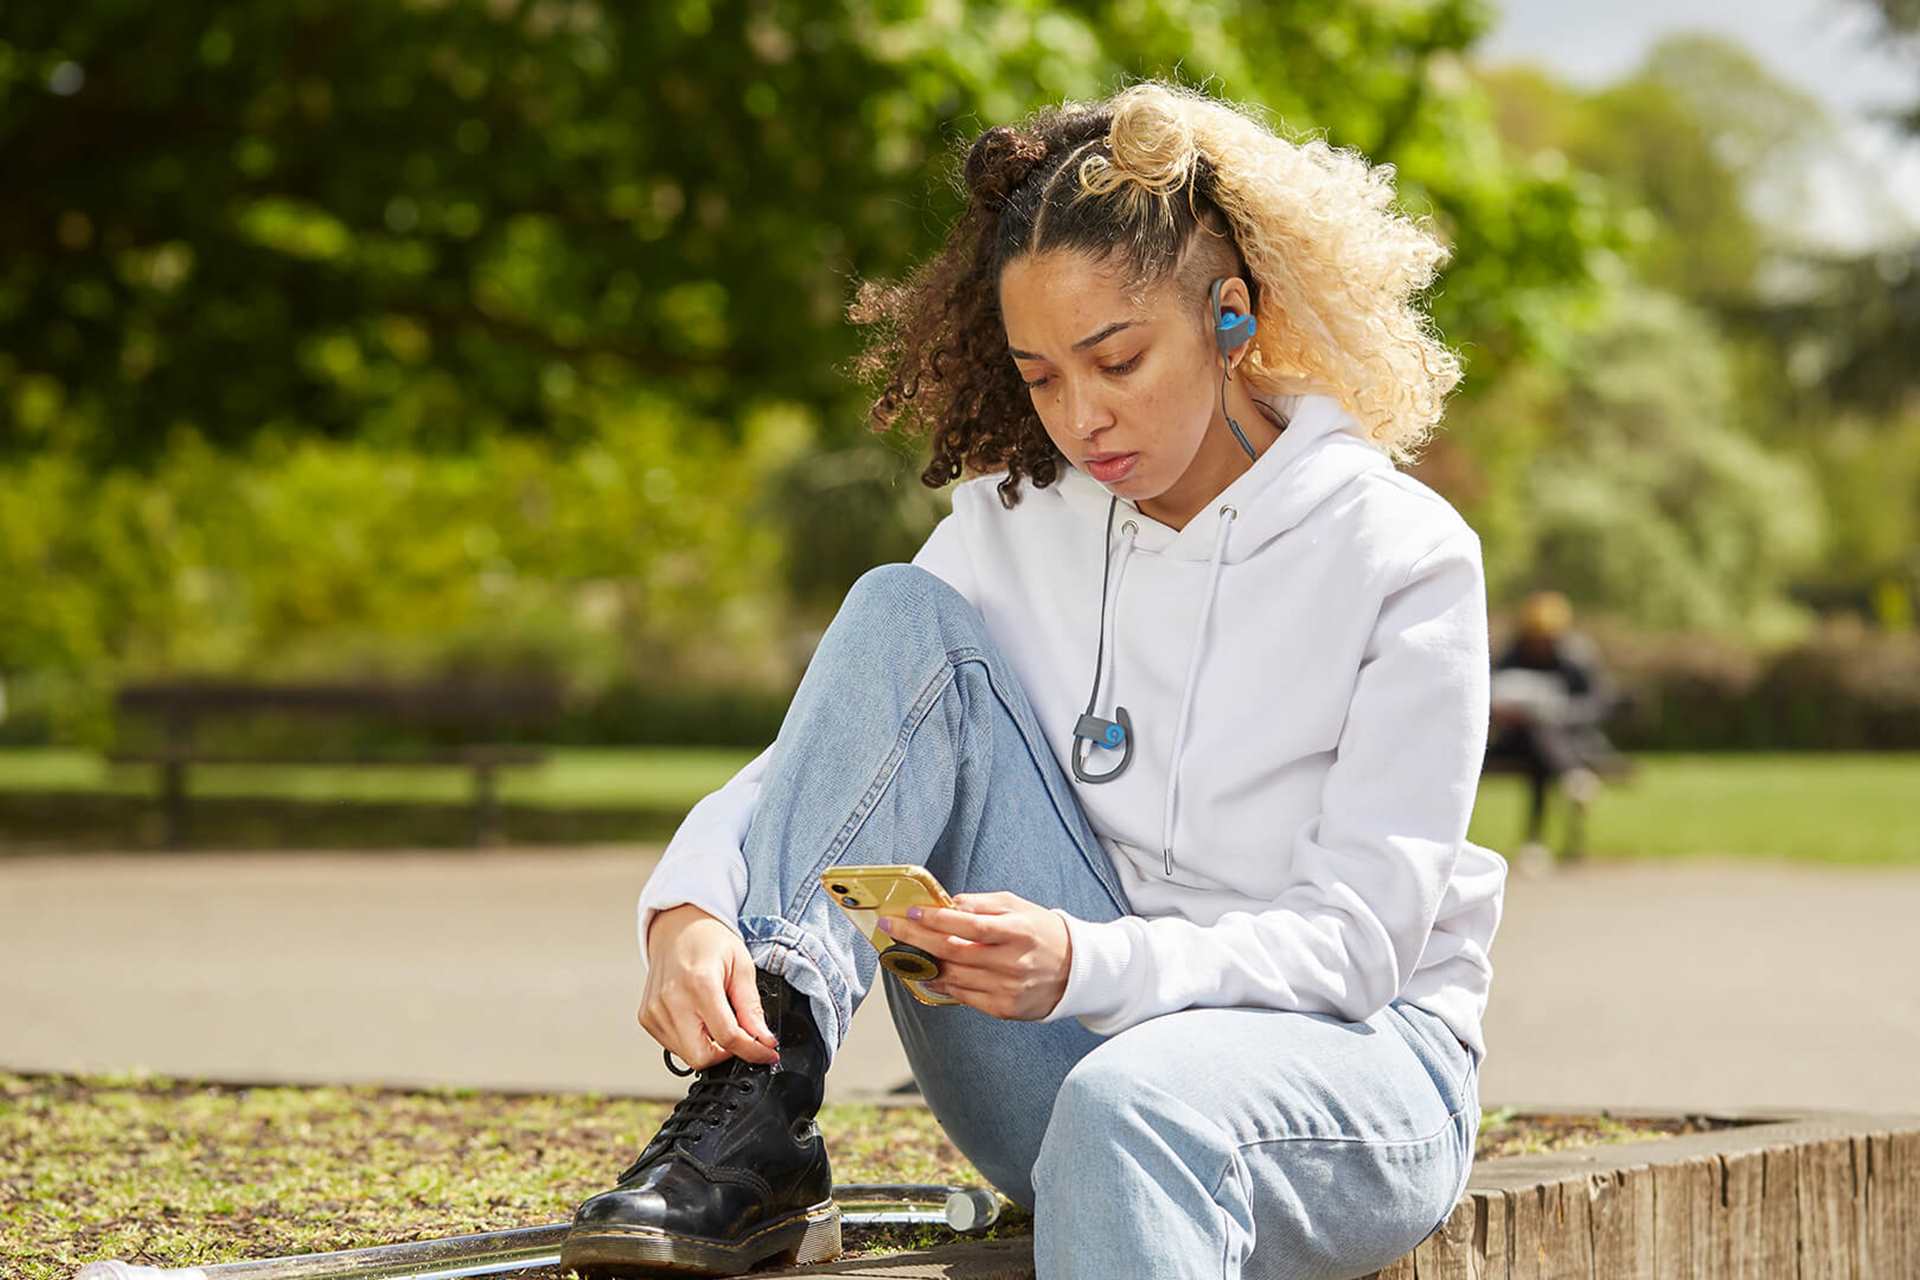 wide-shot-of-a-girl-with-headphones-and-looking-at-her-phones-while-sitting-in-the-park